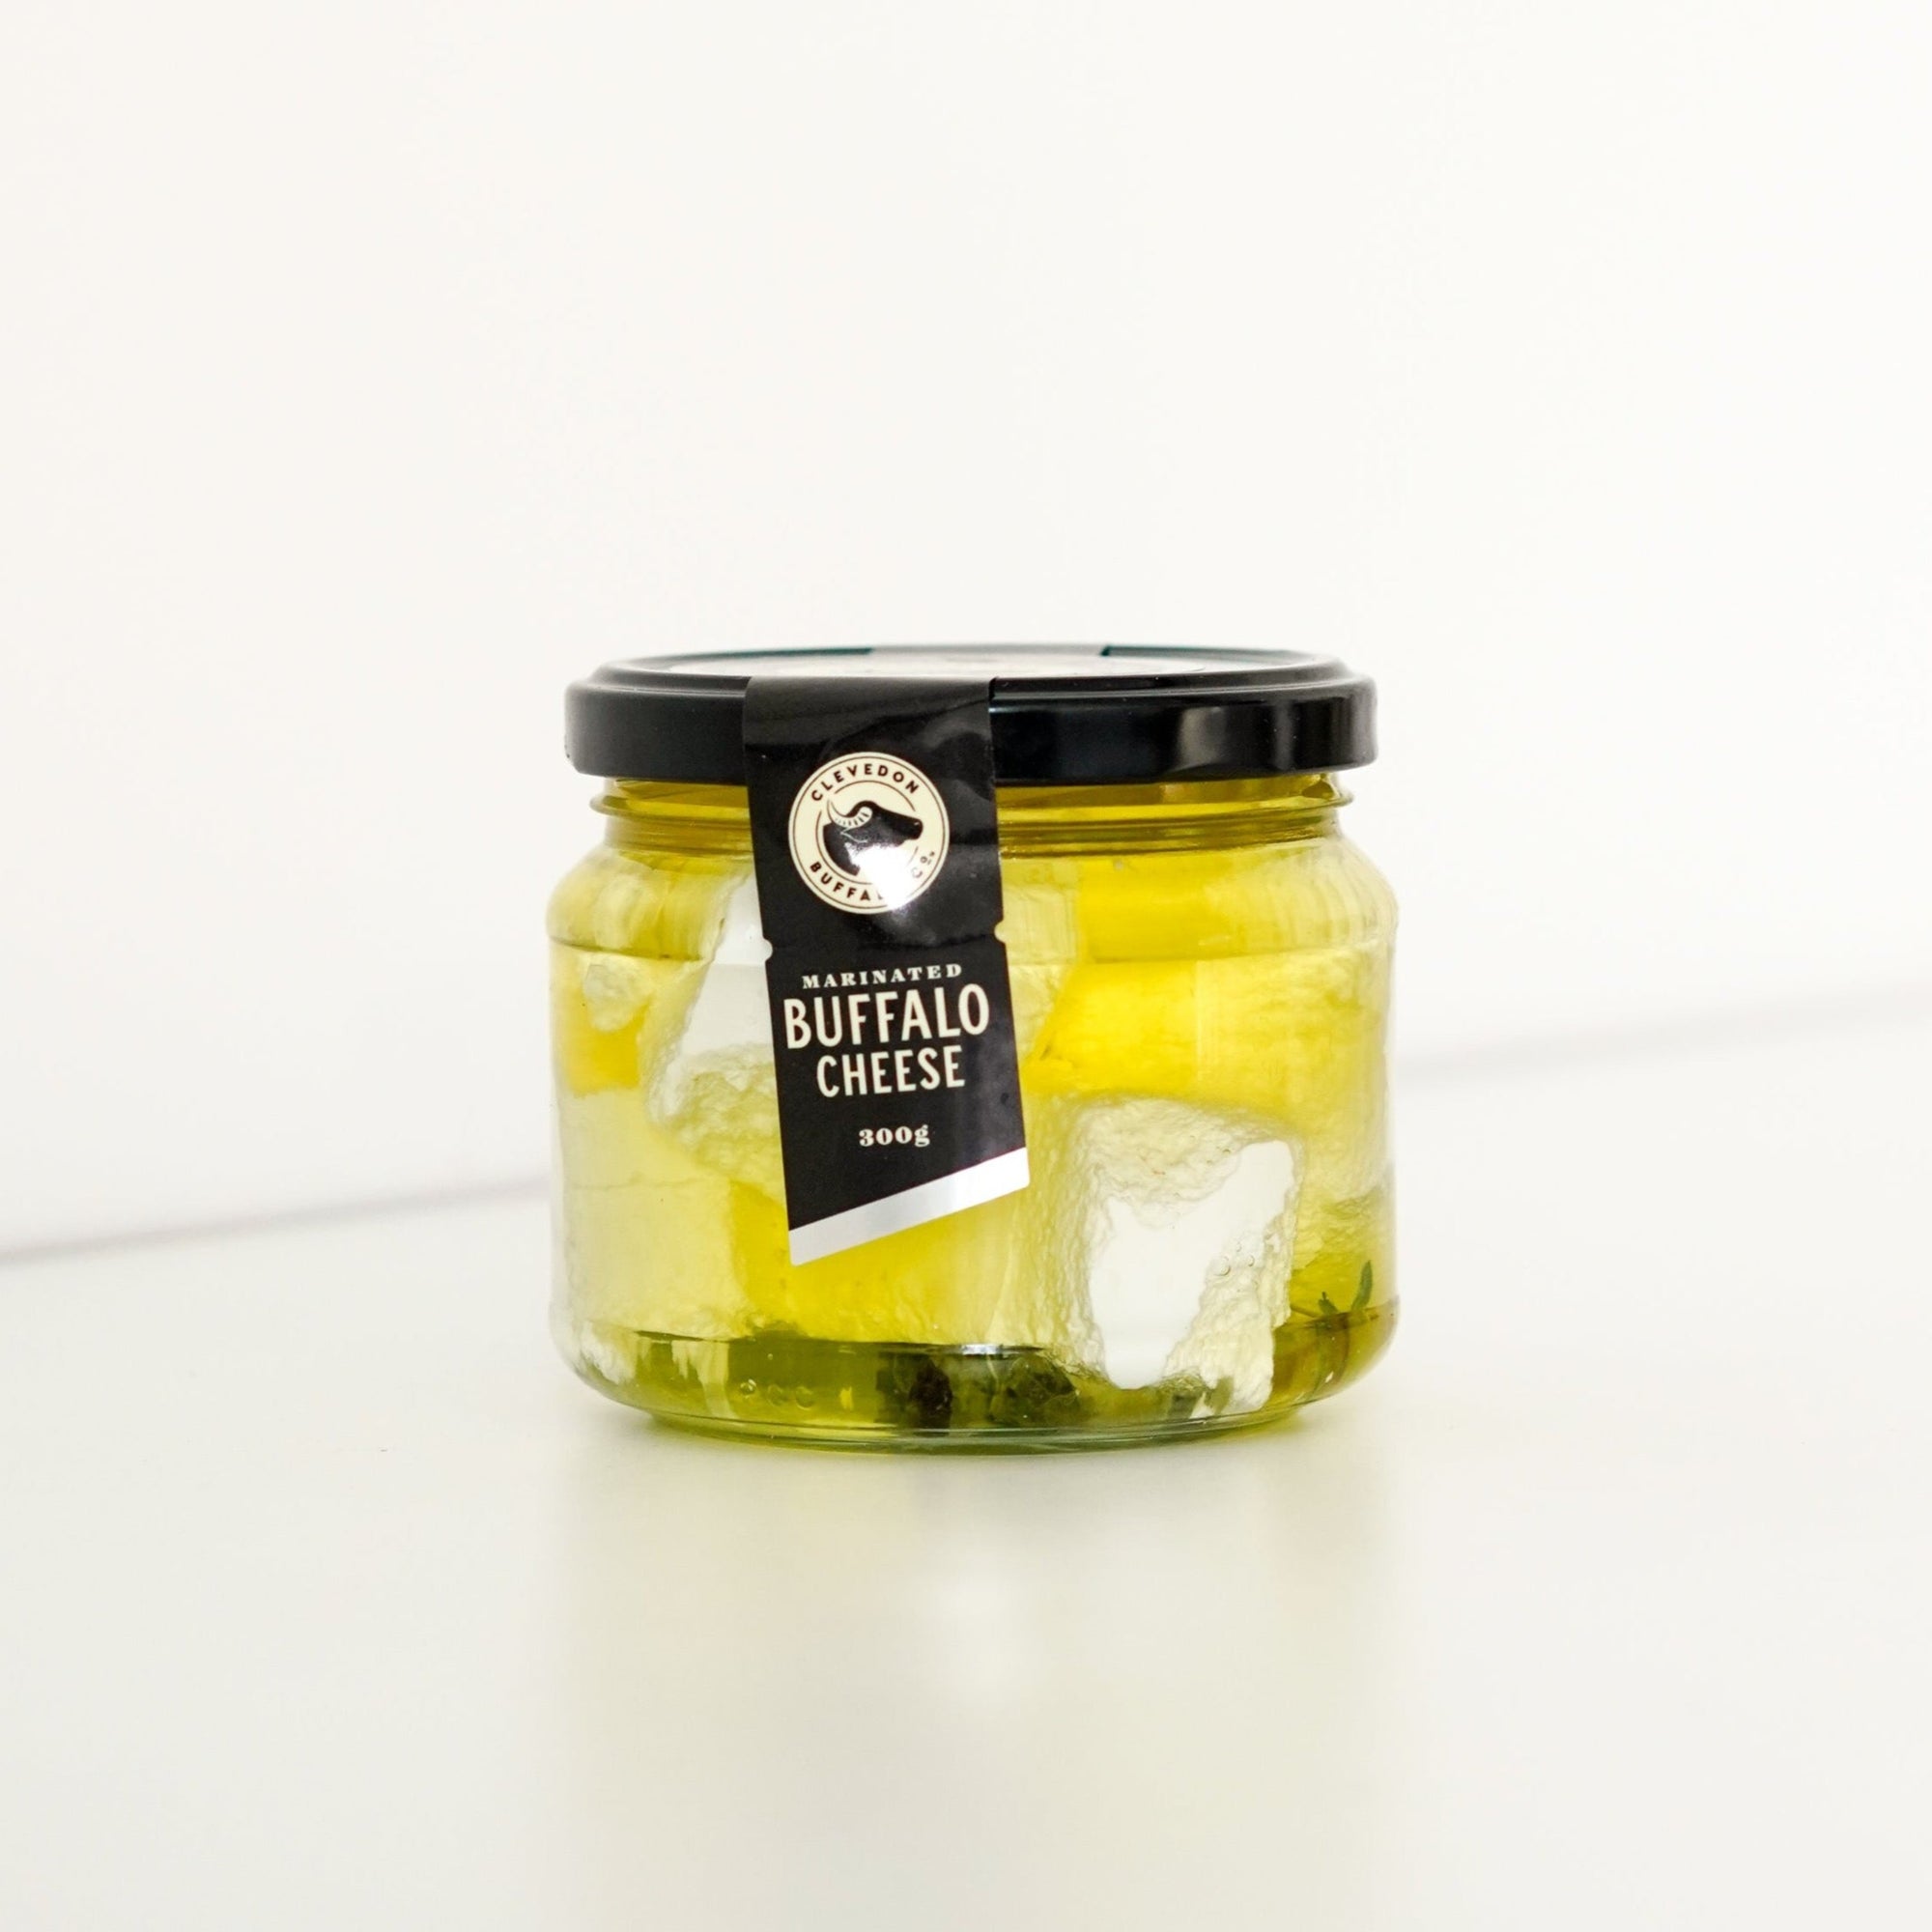 image of jar filled with buffalo cheese and oil. The jar has a black lid